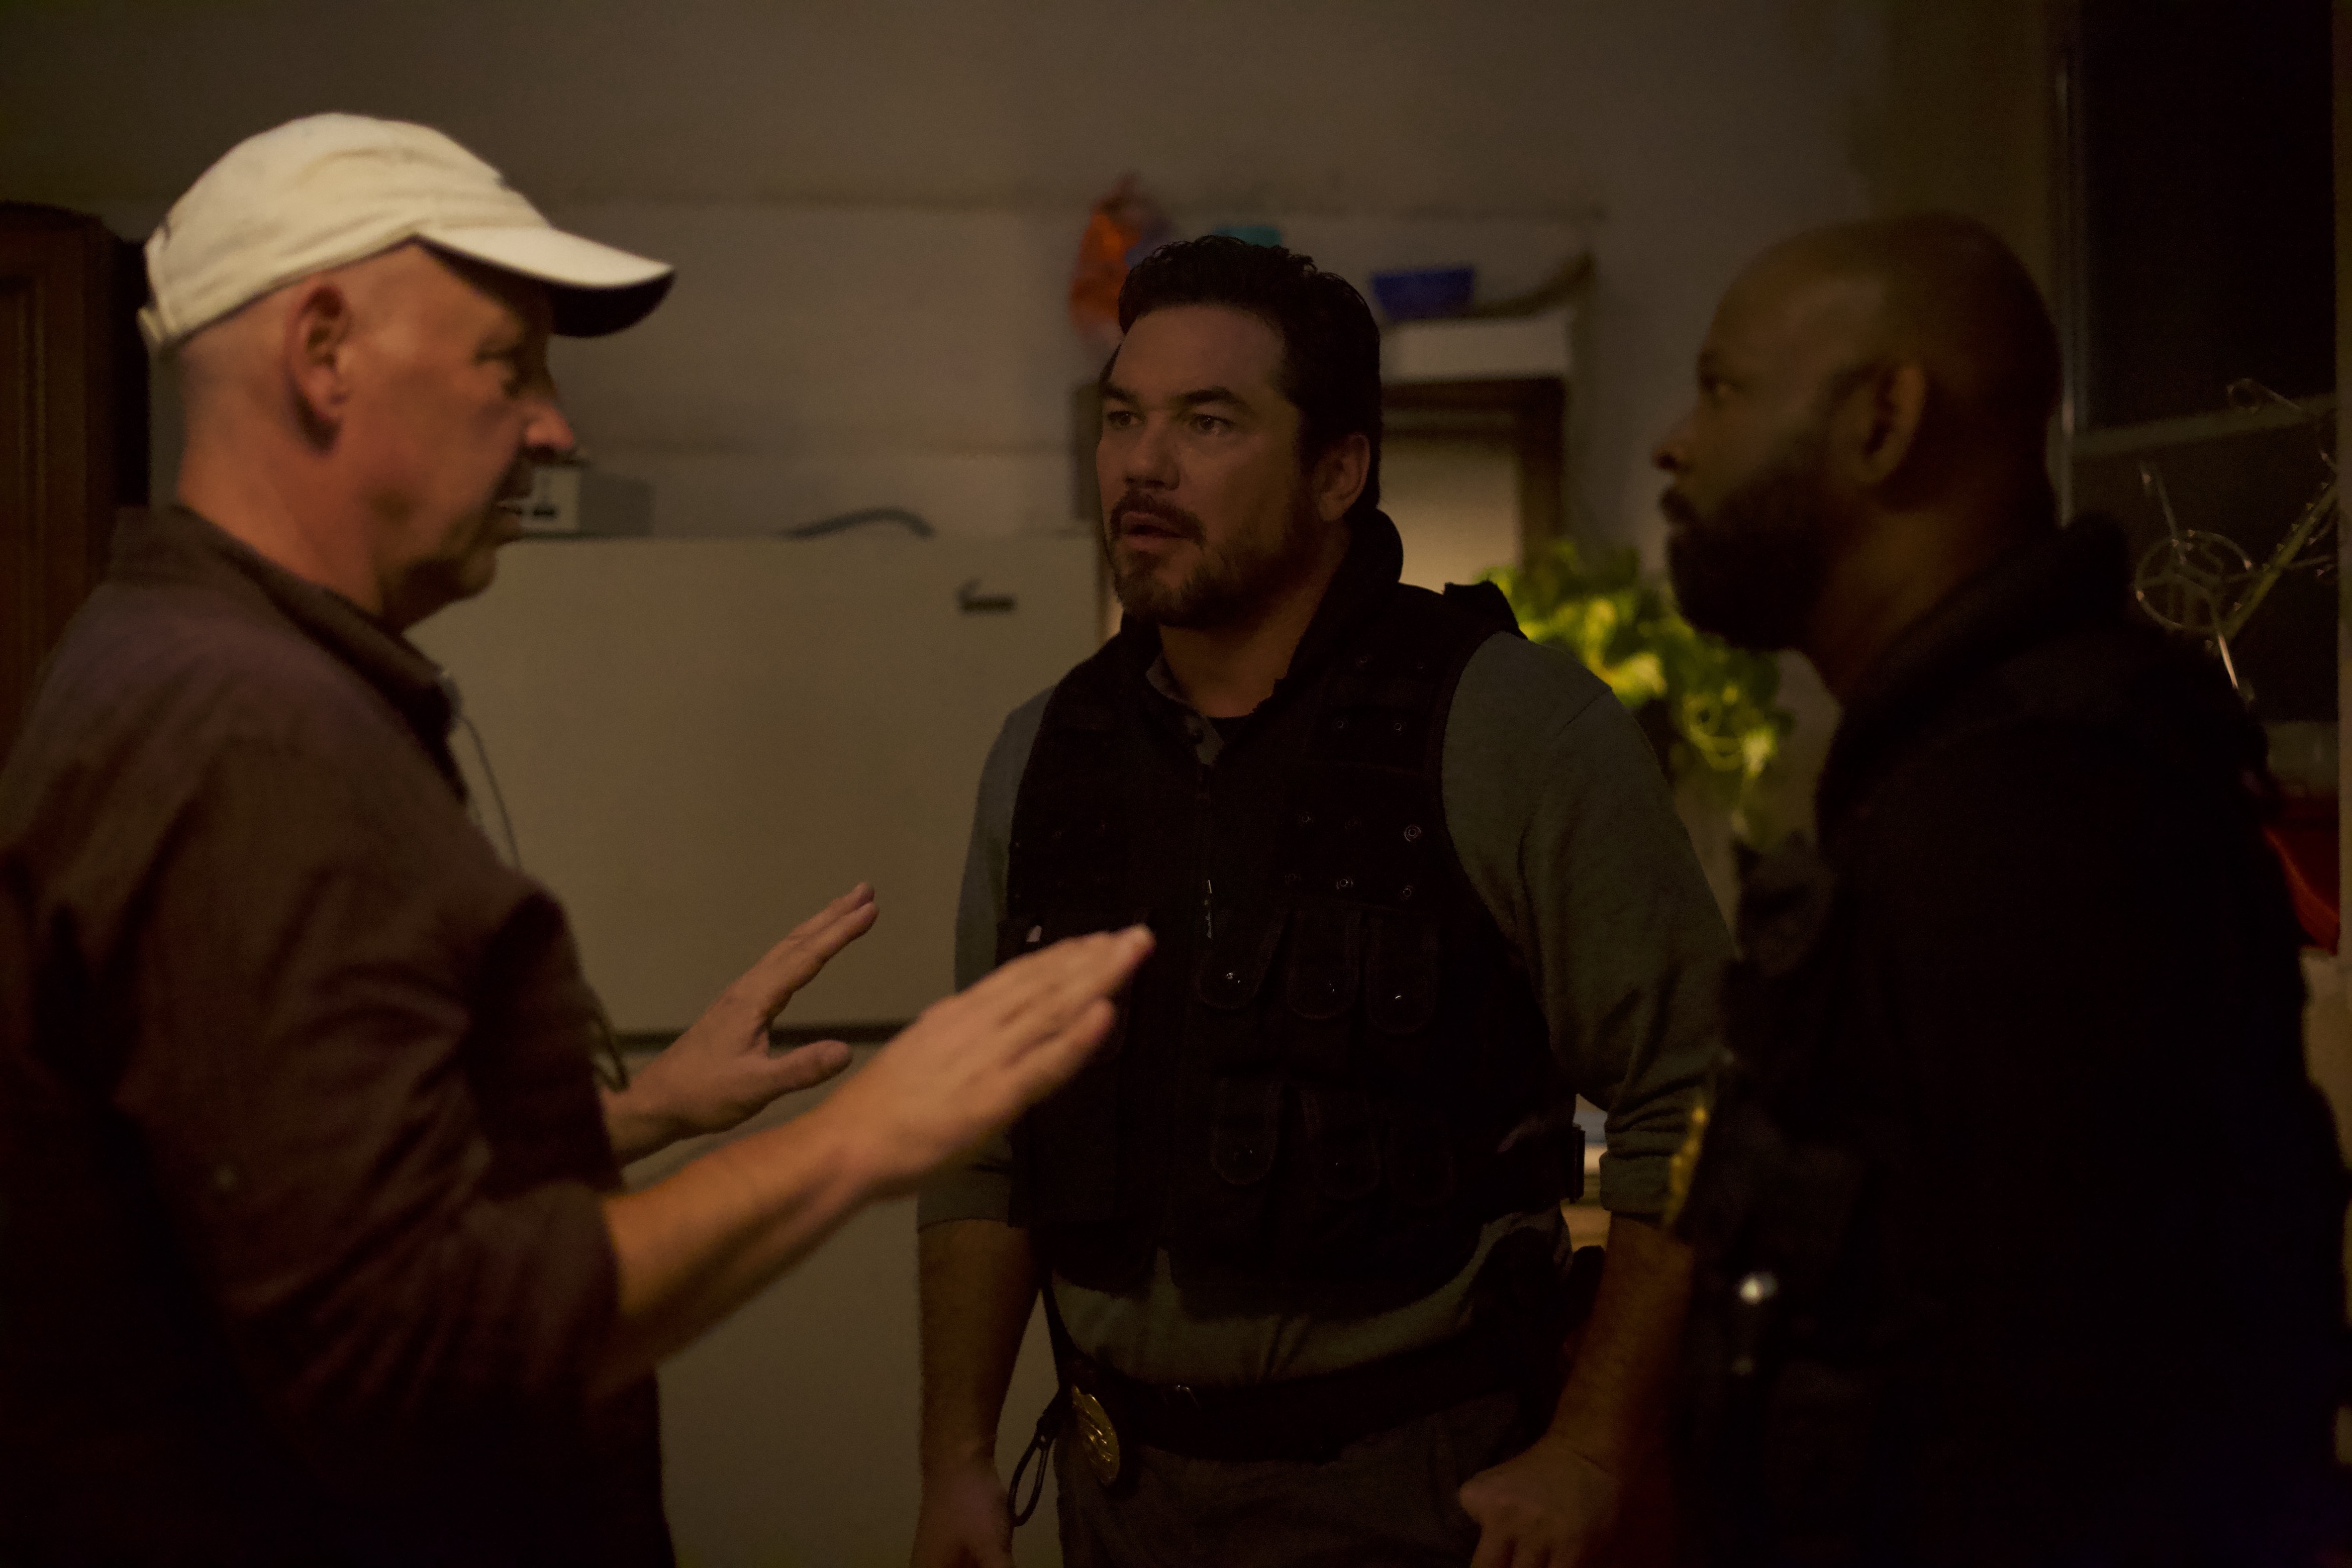 Nick Searcy discussing scene with Dean Cain and Alfonzo Rachel on the set of Gosnell.